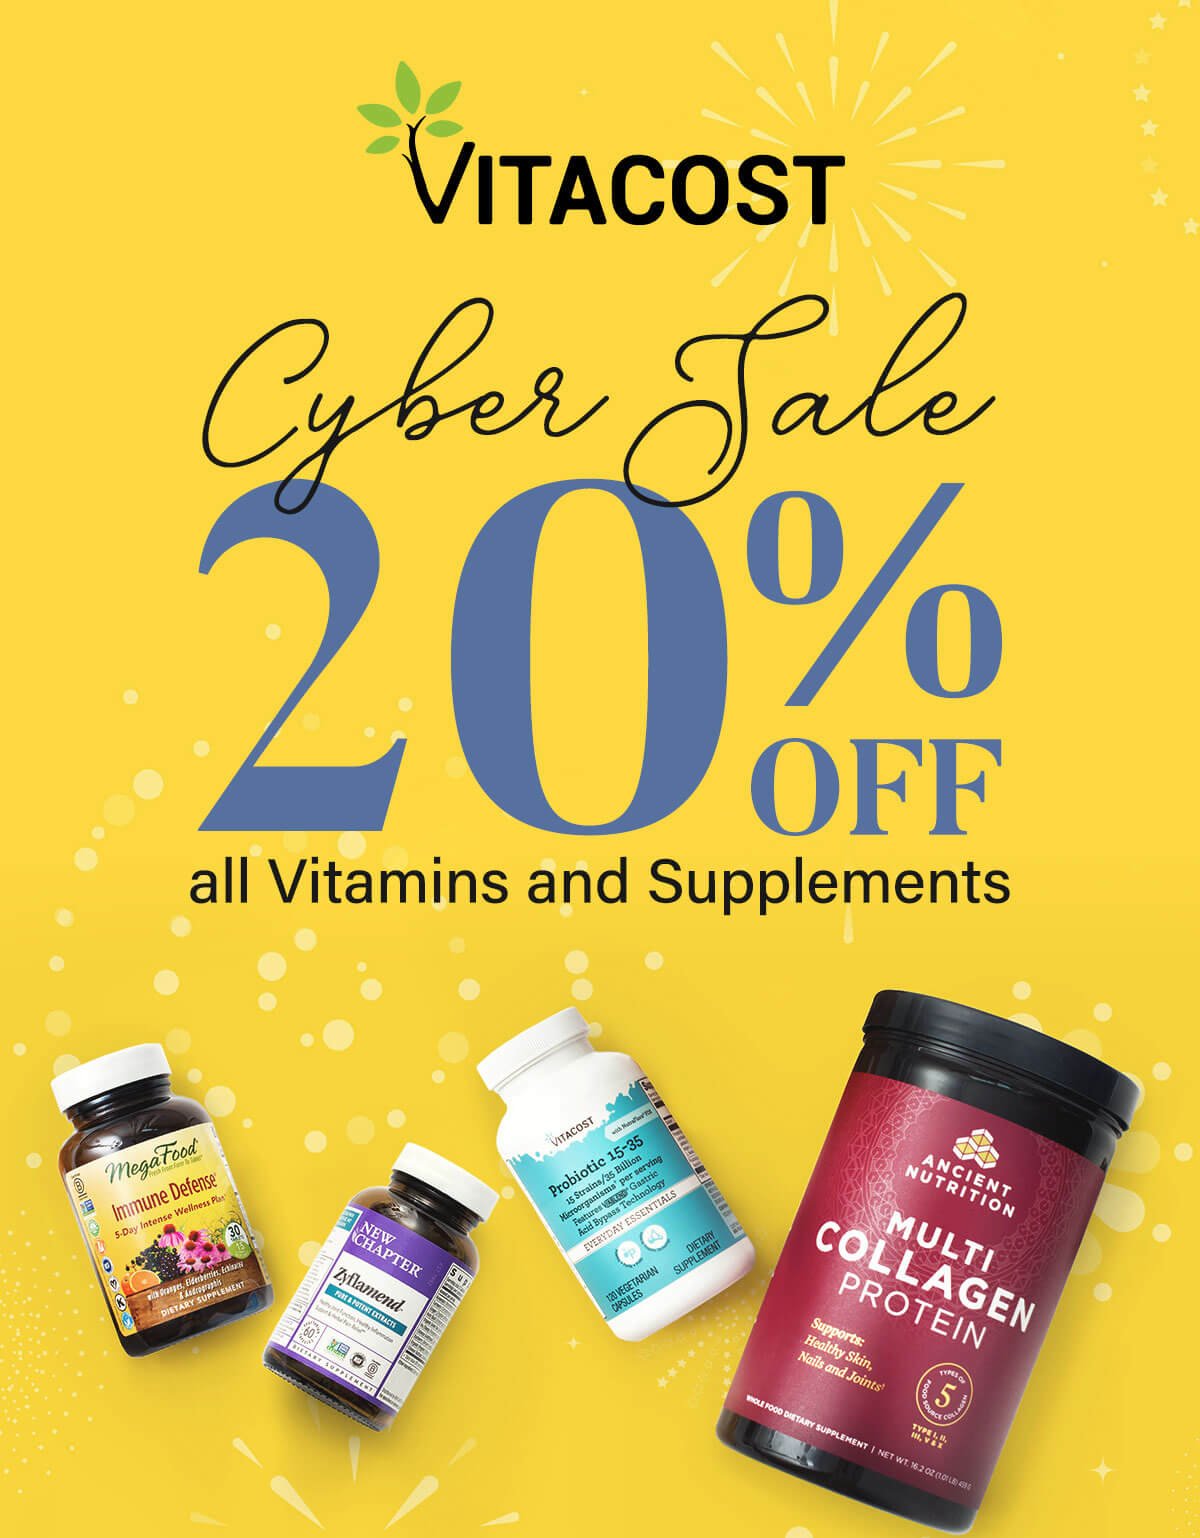 Vitacost cyber sale - 20% off all vitamins and supplements